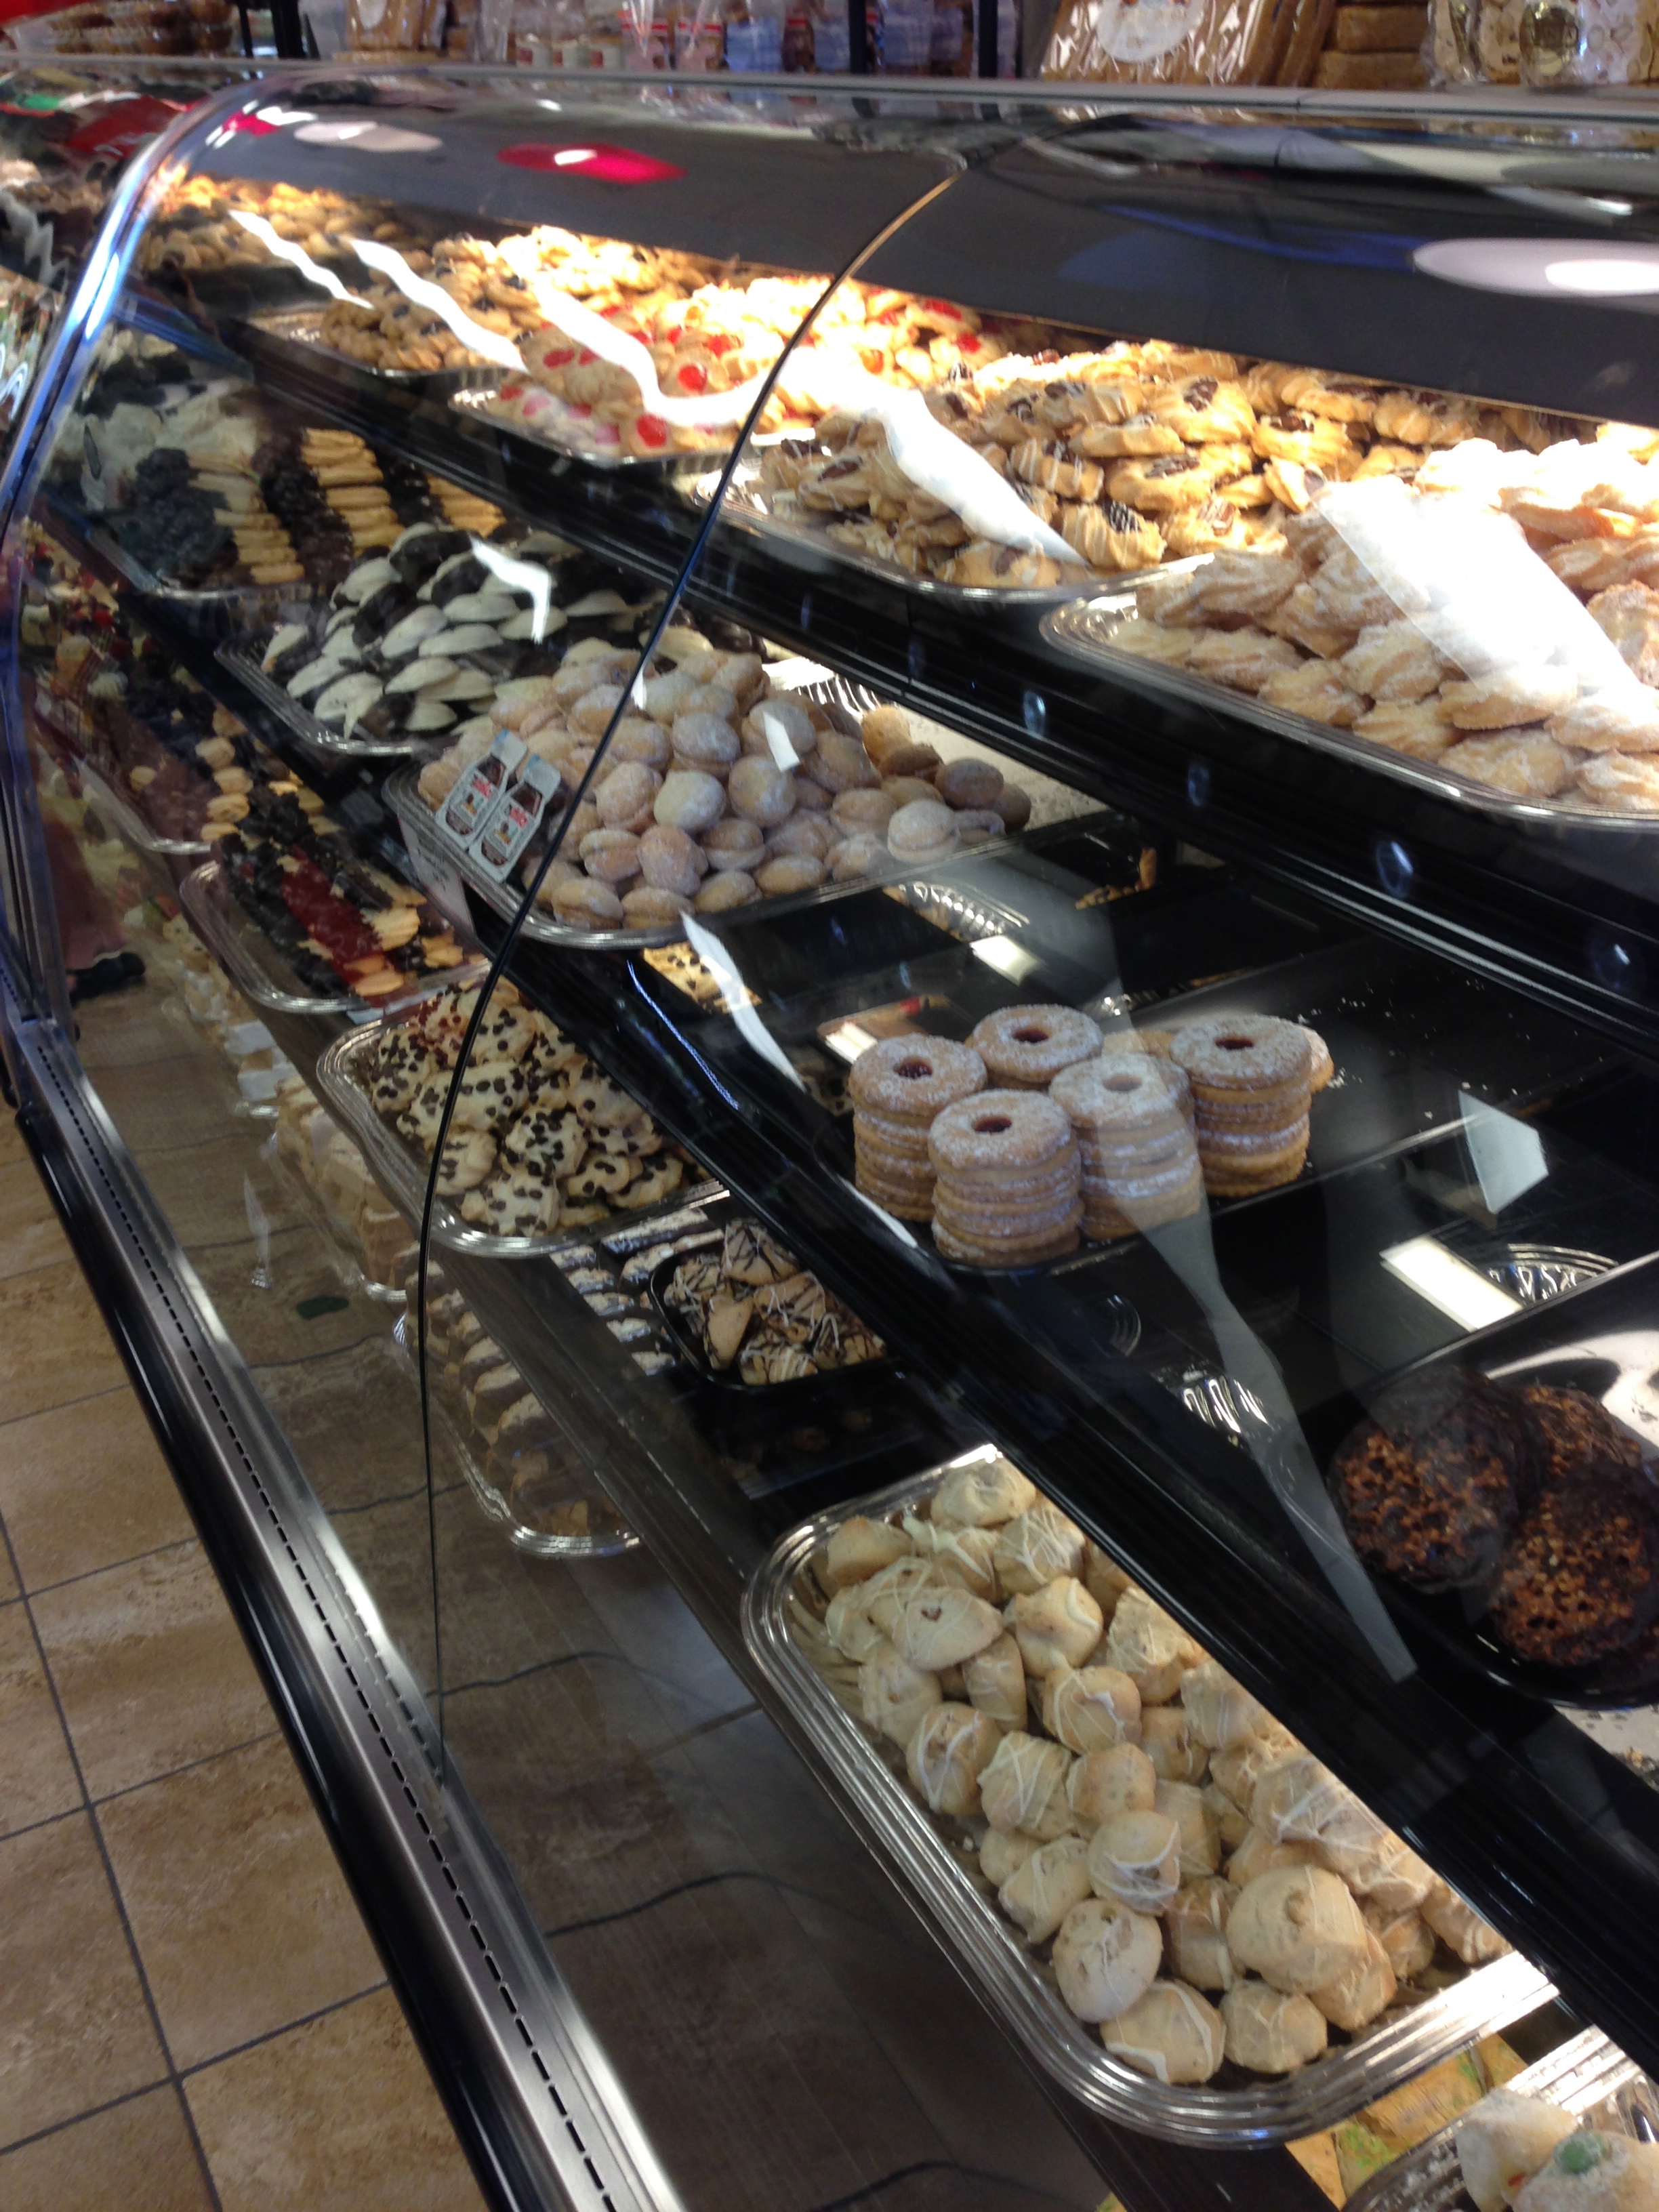 So many varieties of Italian cookies and cakes. 